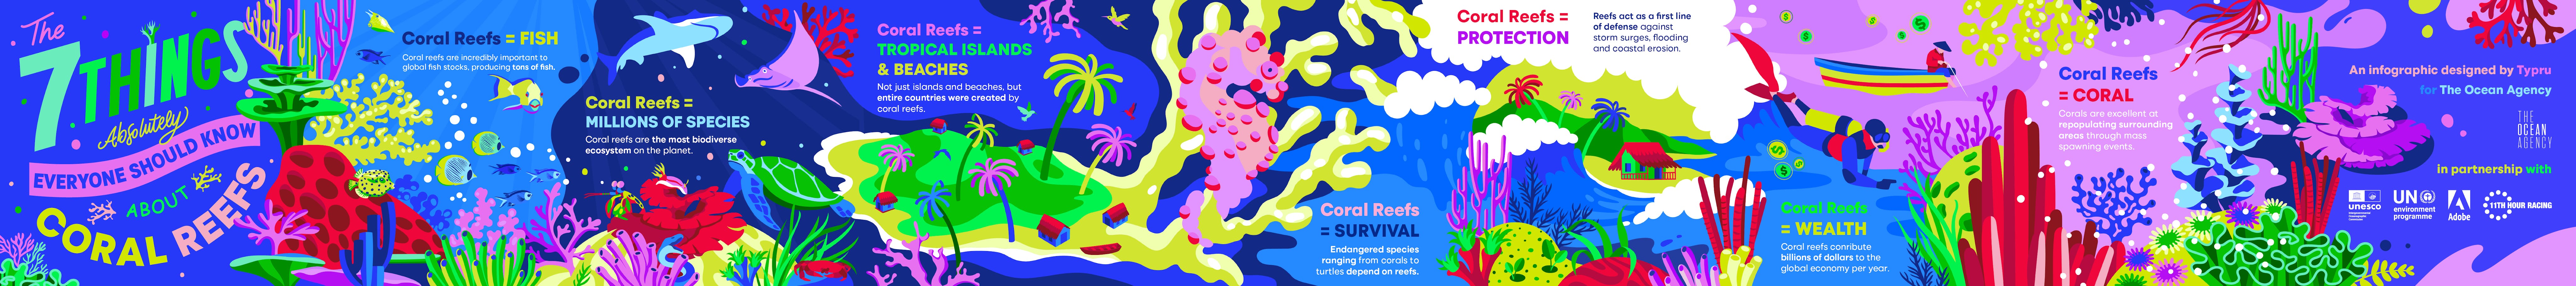 7 things about coral reefs illustration